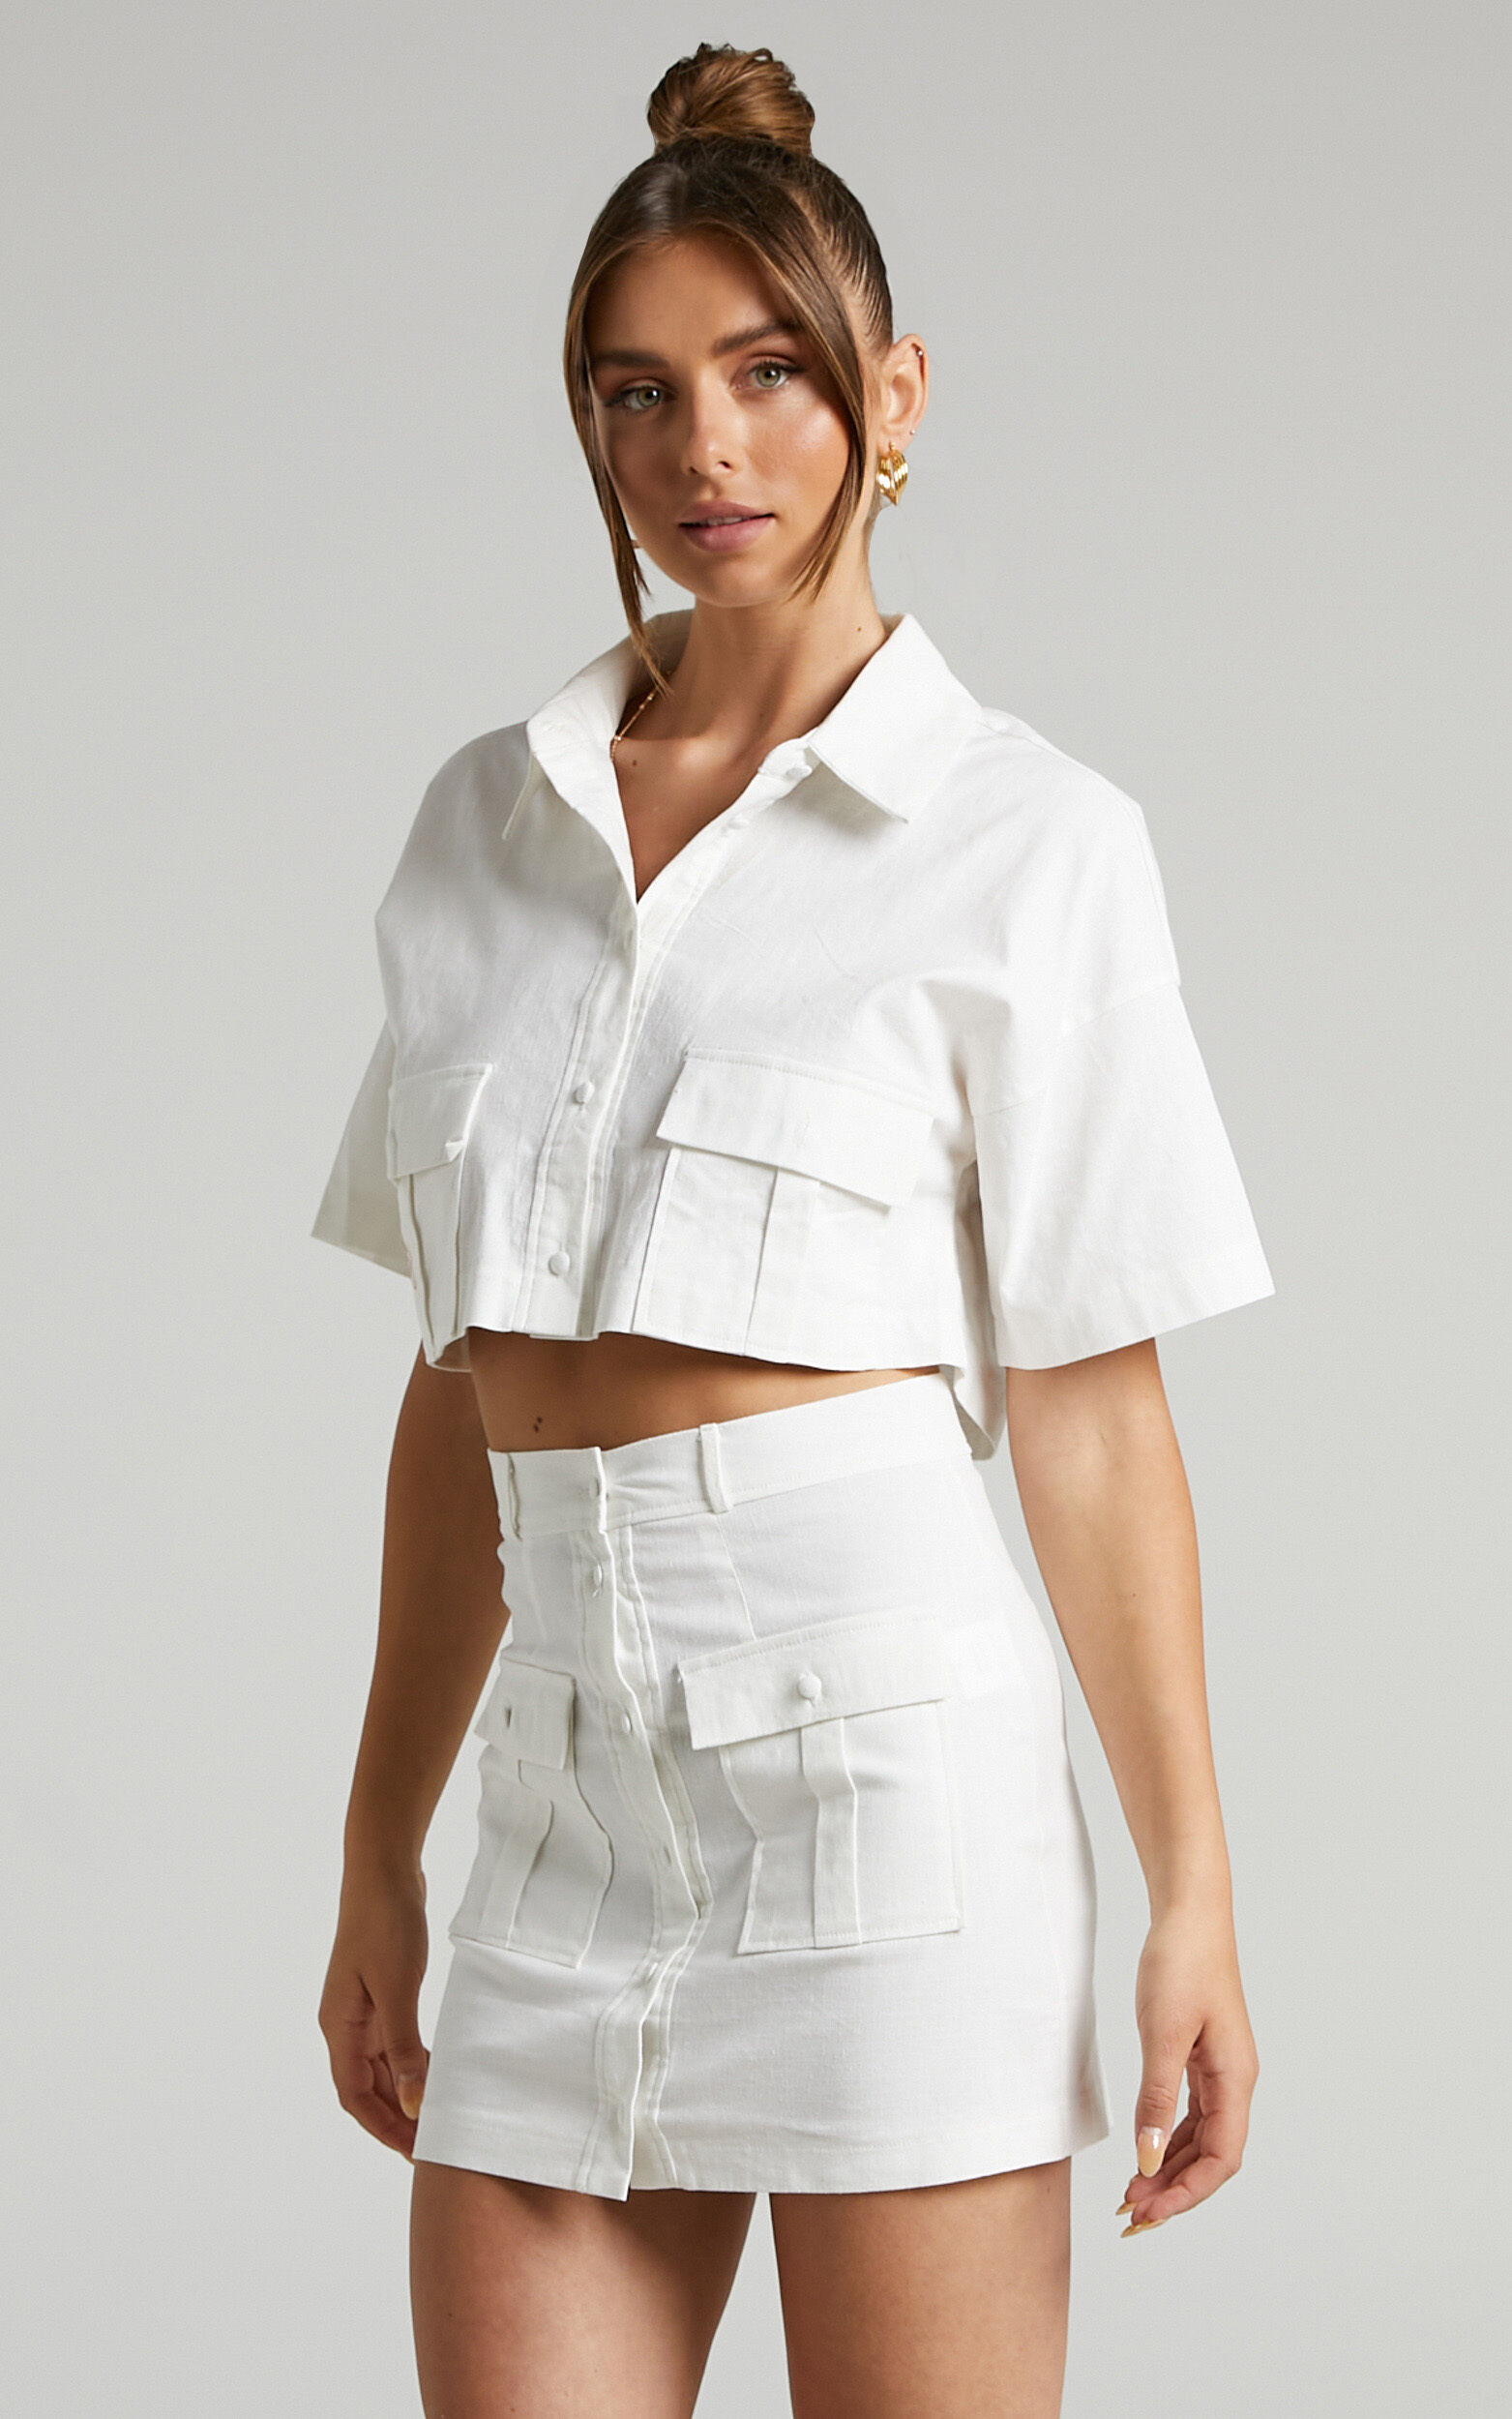 Navine Two Piece Set - Button Front Crop Top and Cargo Pocket Mini Skirt Set in White - 04, WHT2